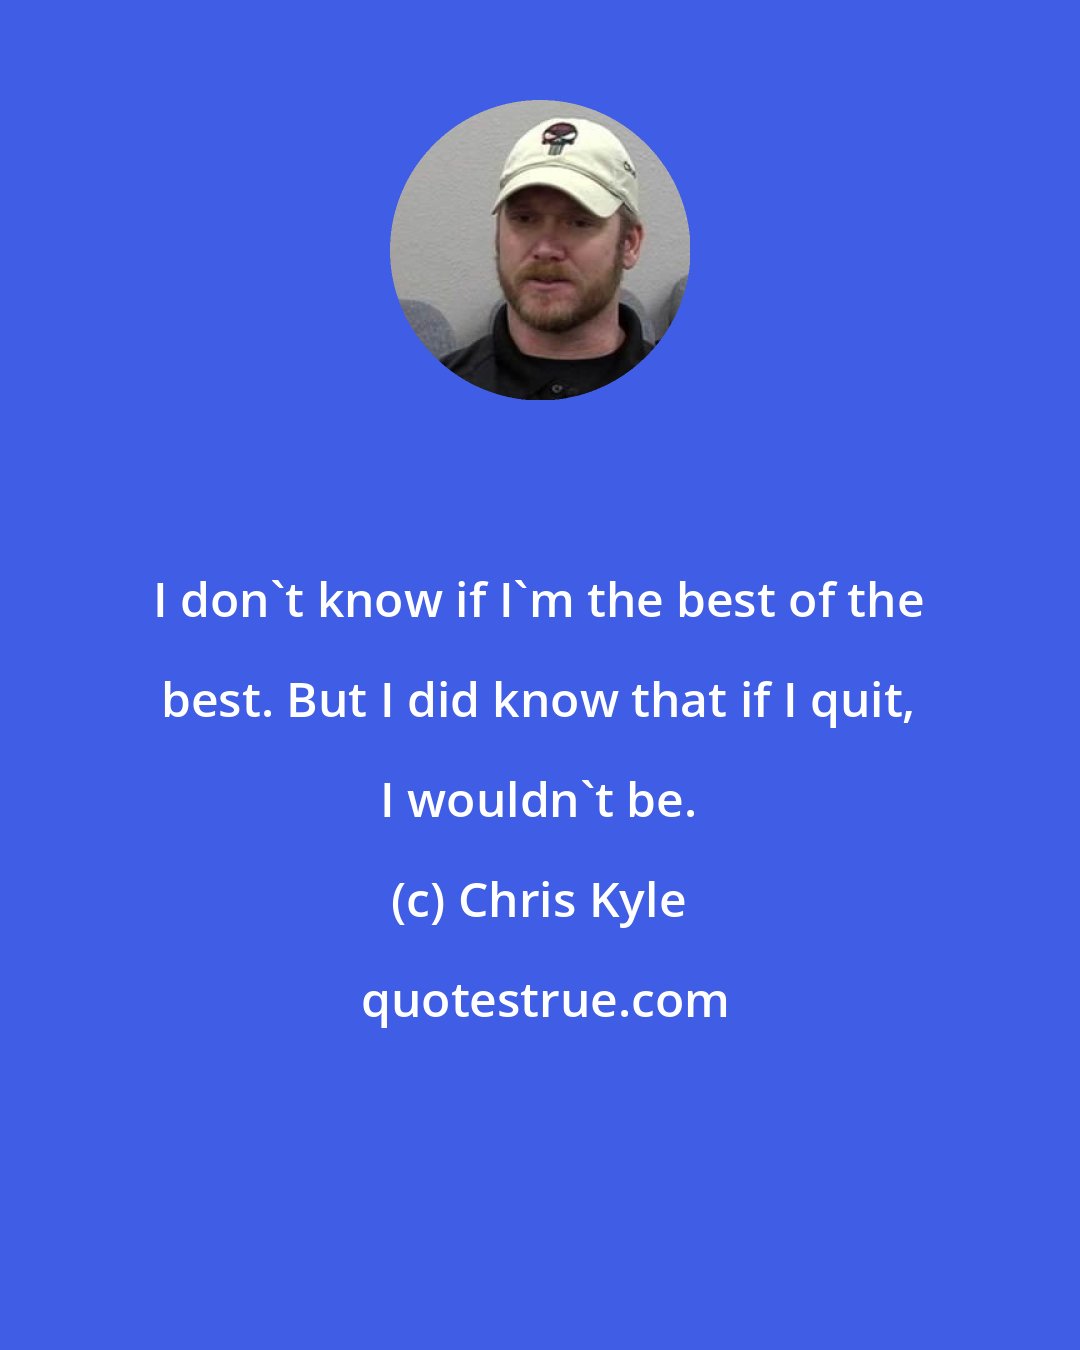 Chris Kyle: I don't know if I'm the best of the best. But I did know that if I quit, I wouldn't be.